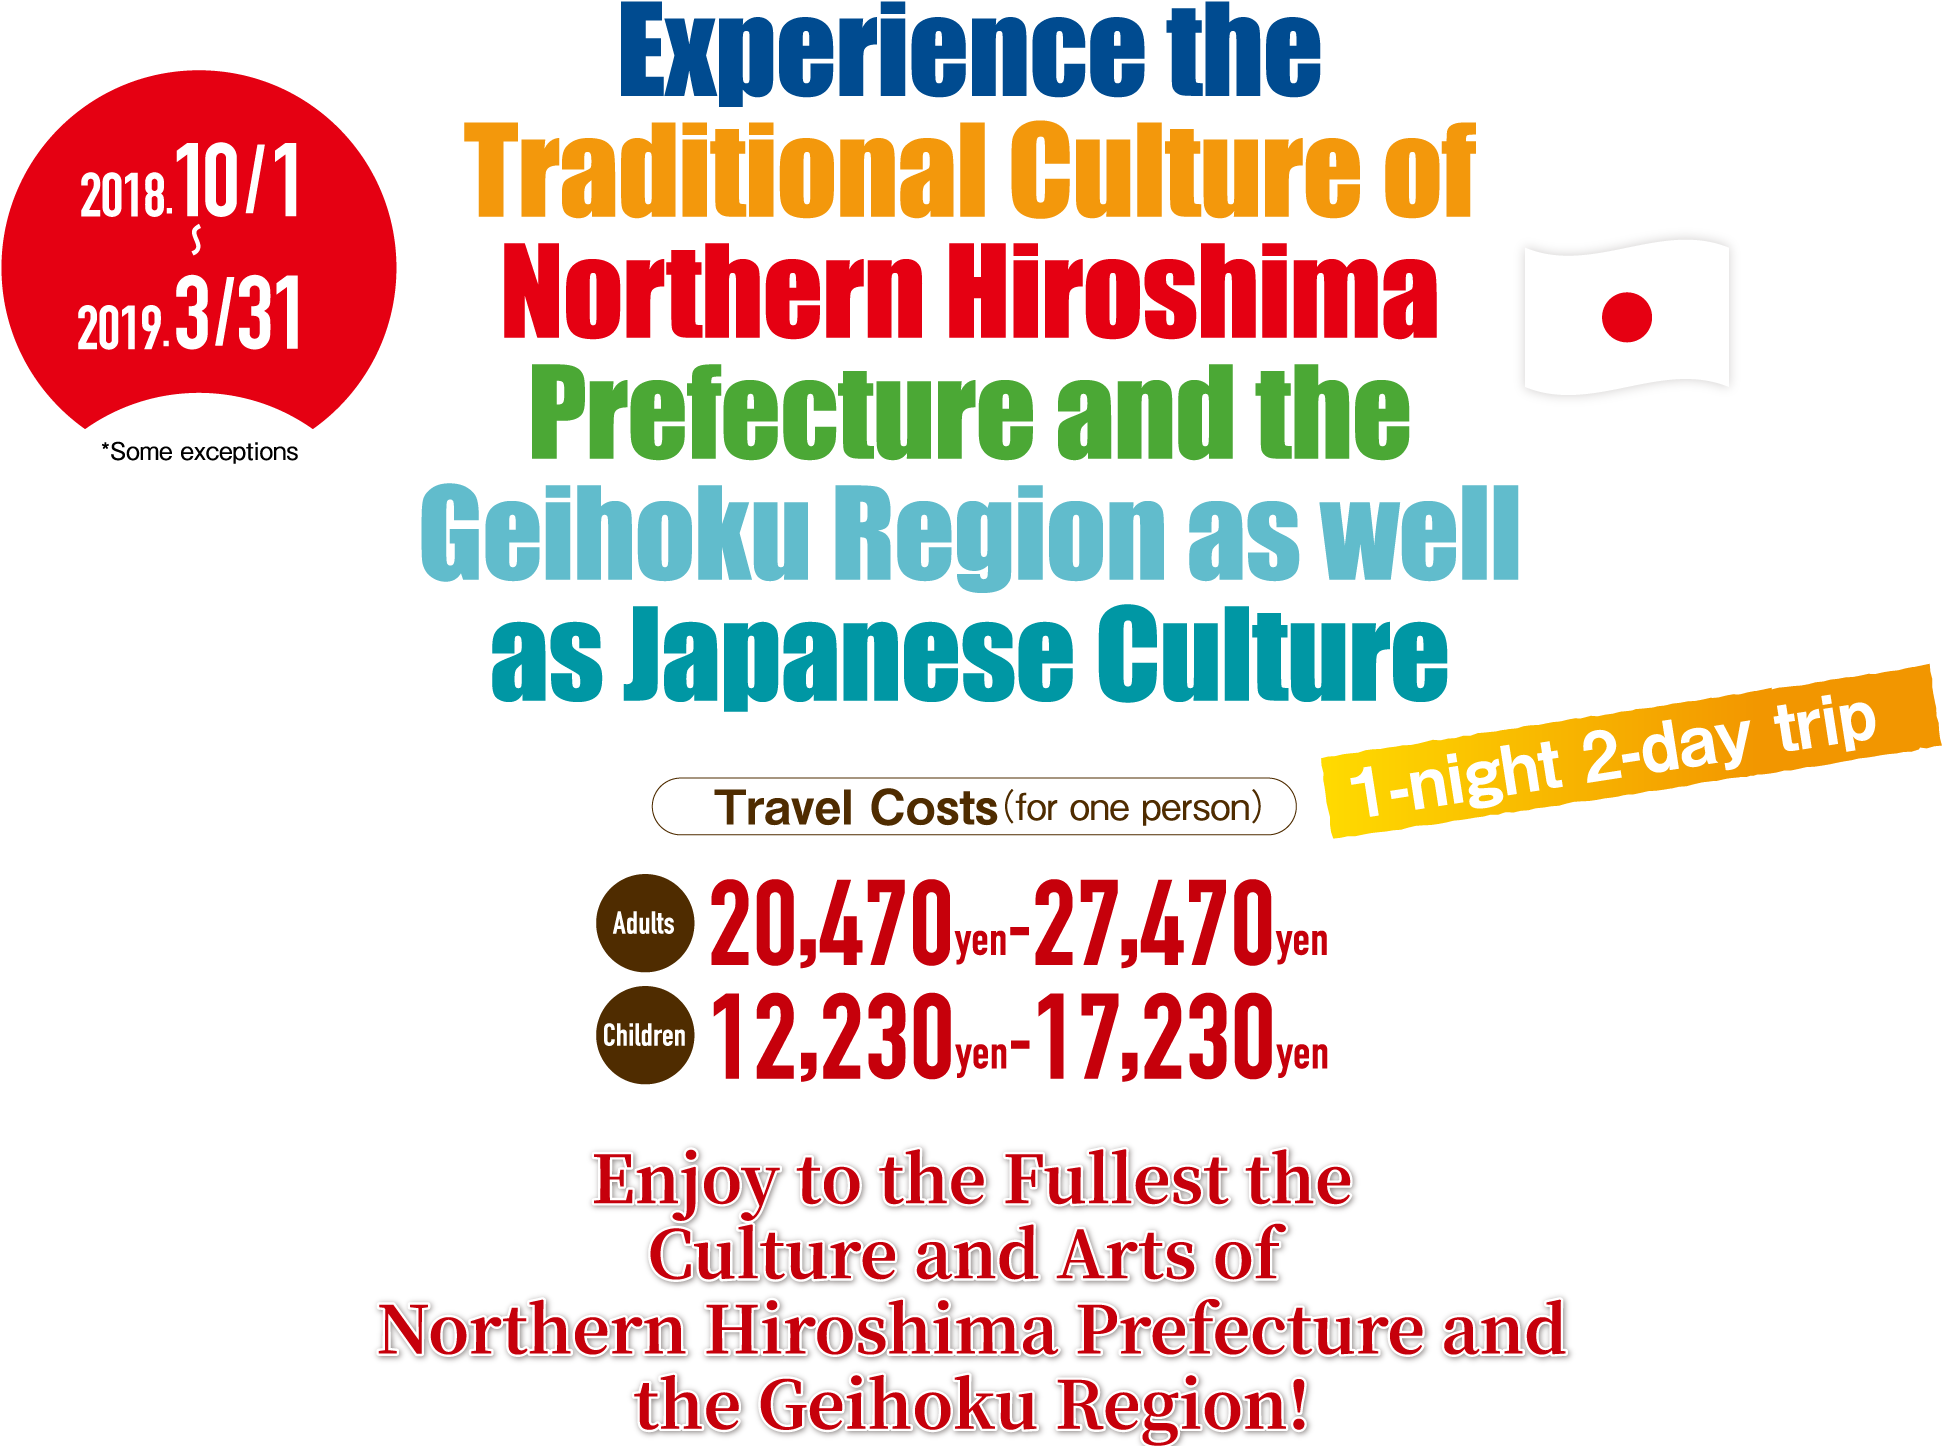 Experience the Traditional Culture of Northern Hiroshima Prefecture and the Geihoku Region as well as Japanese Culture. 1-night 2-day trip